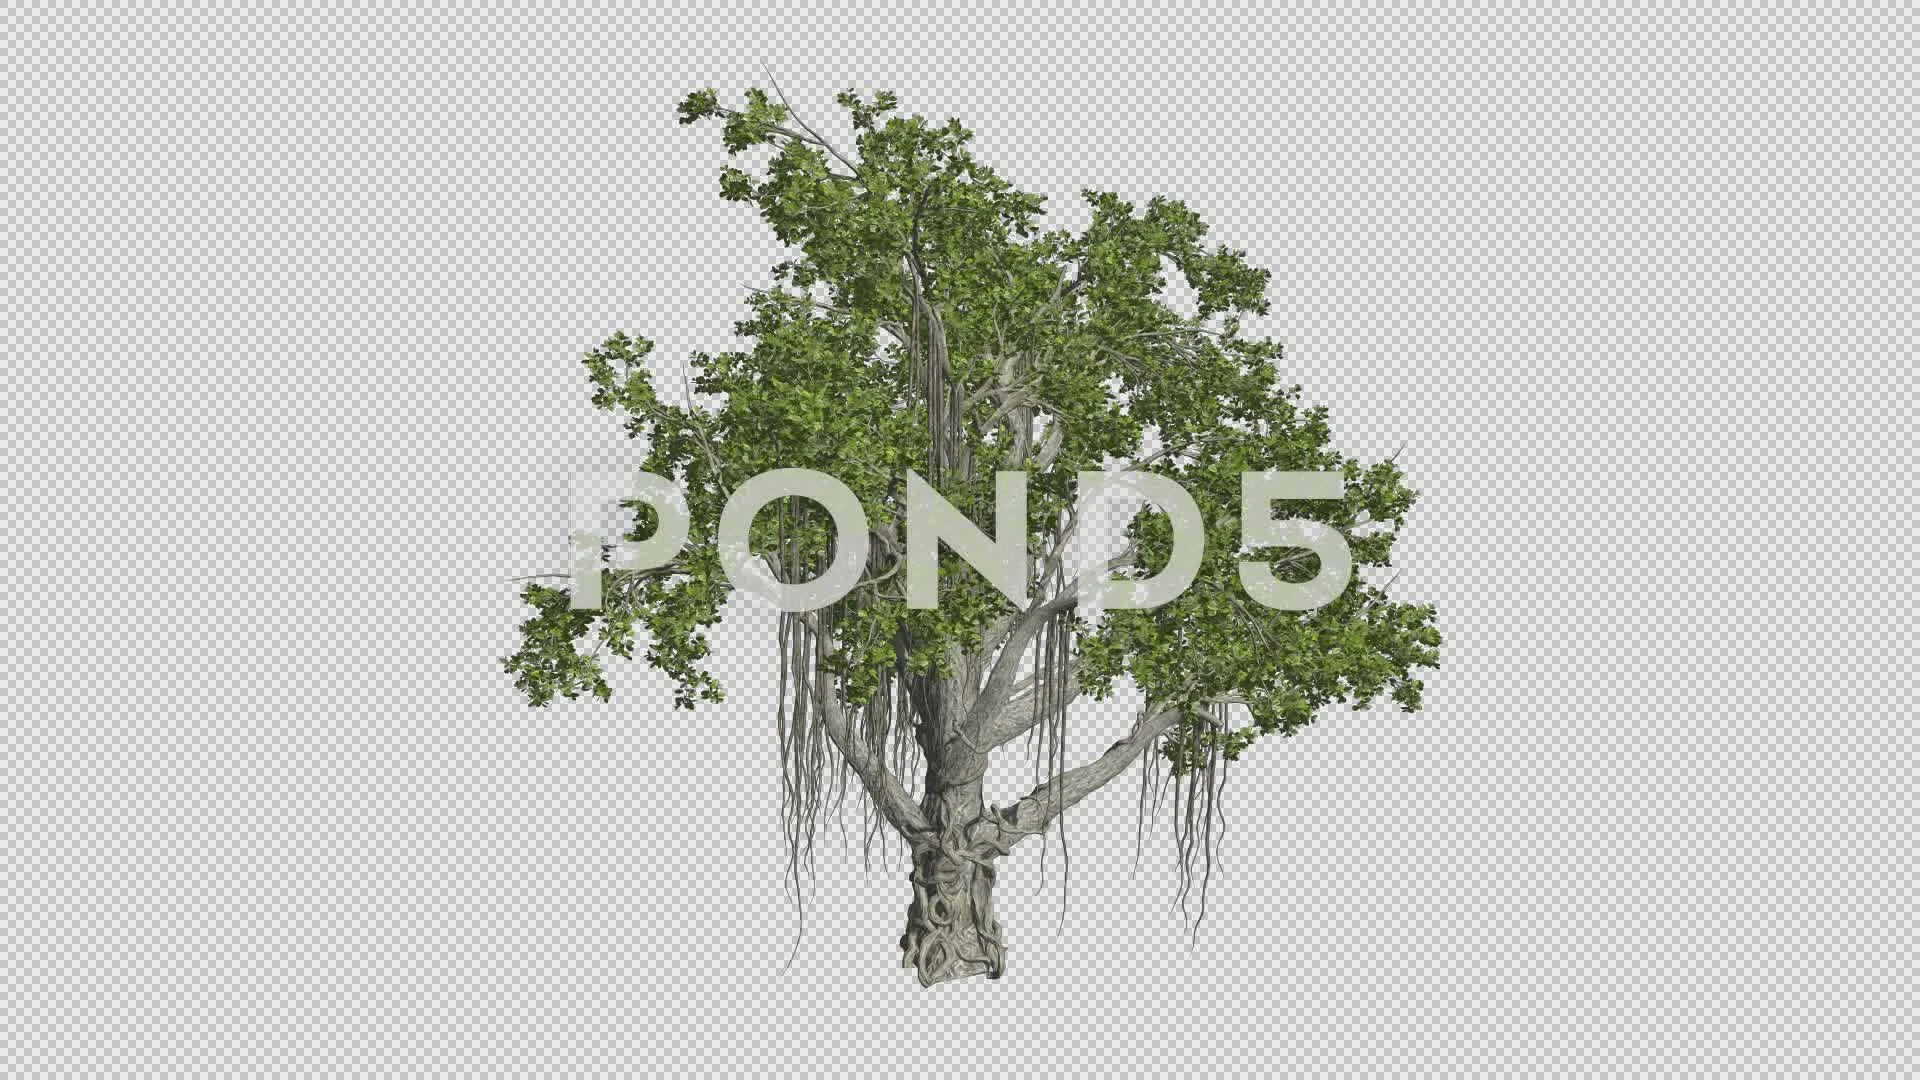 Chinese Banyan Tree Growth Animation | Stock Video | Pond5